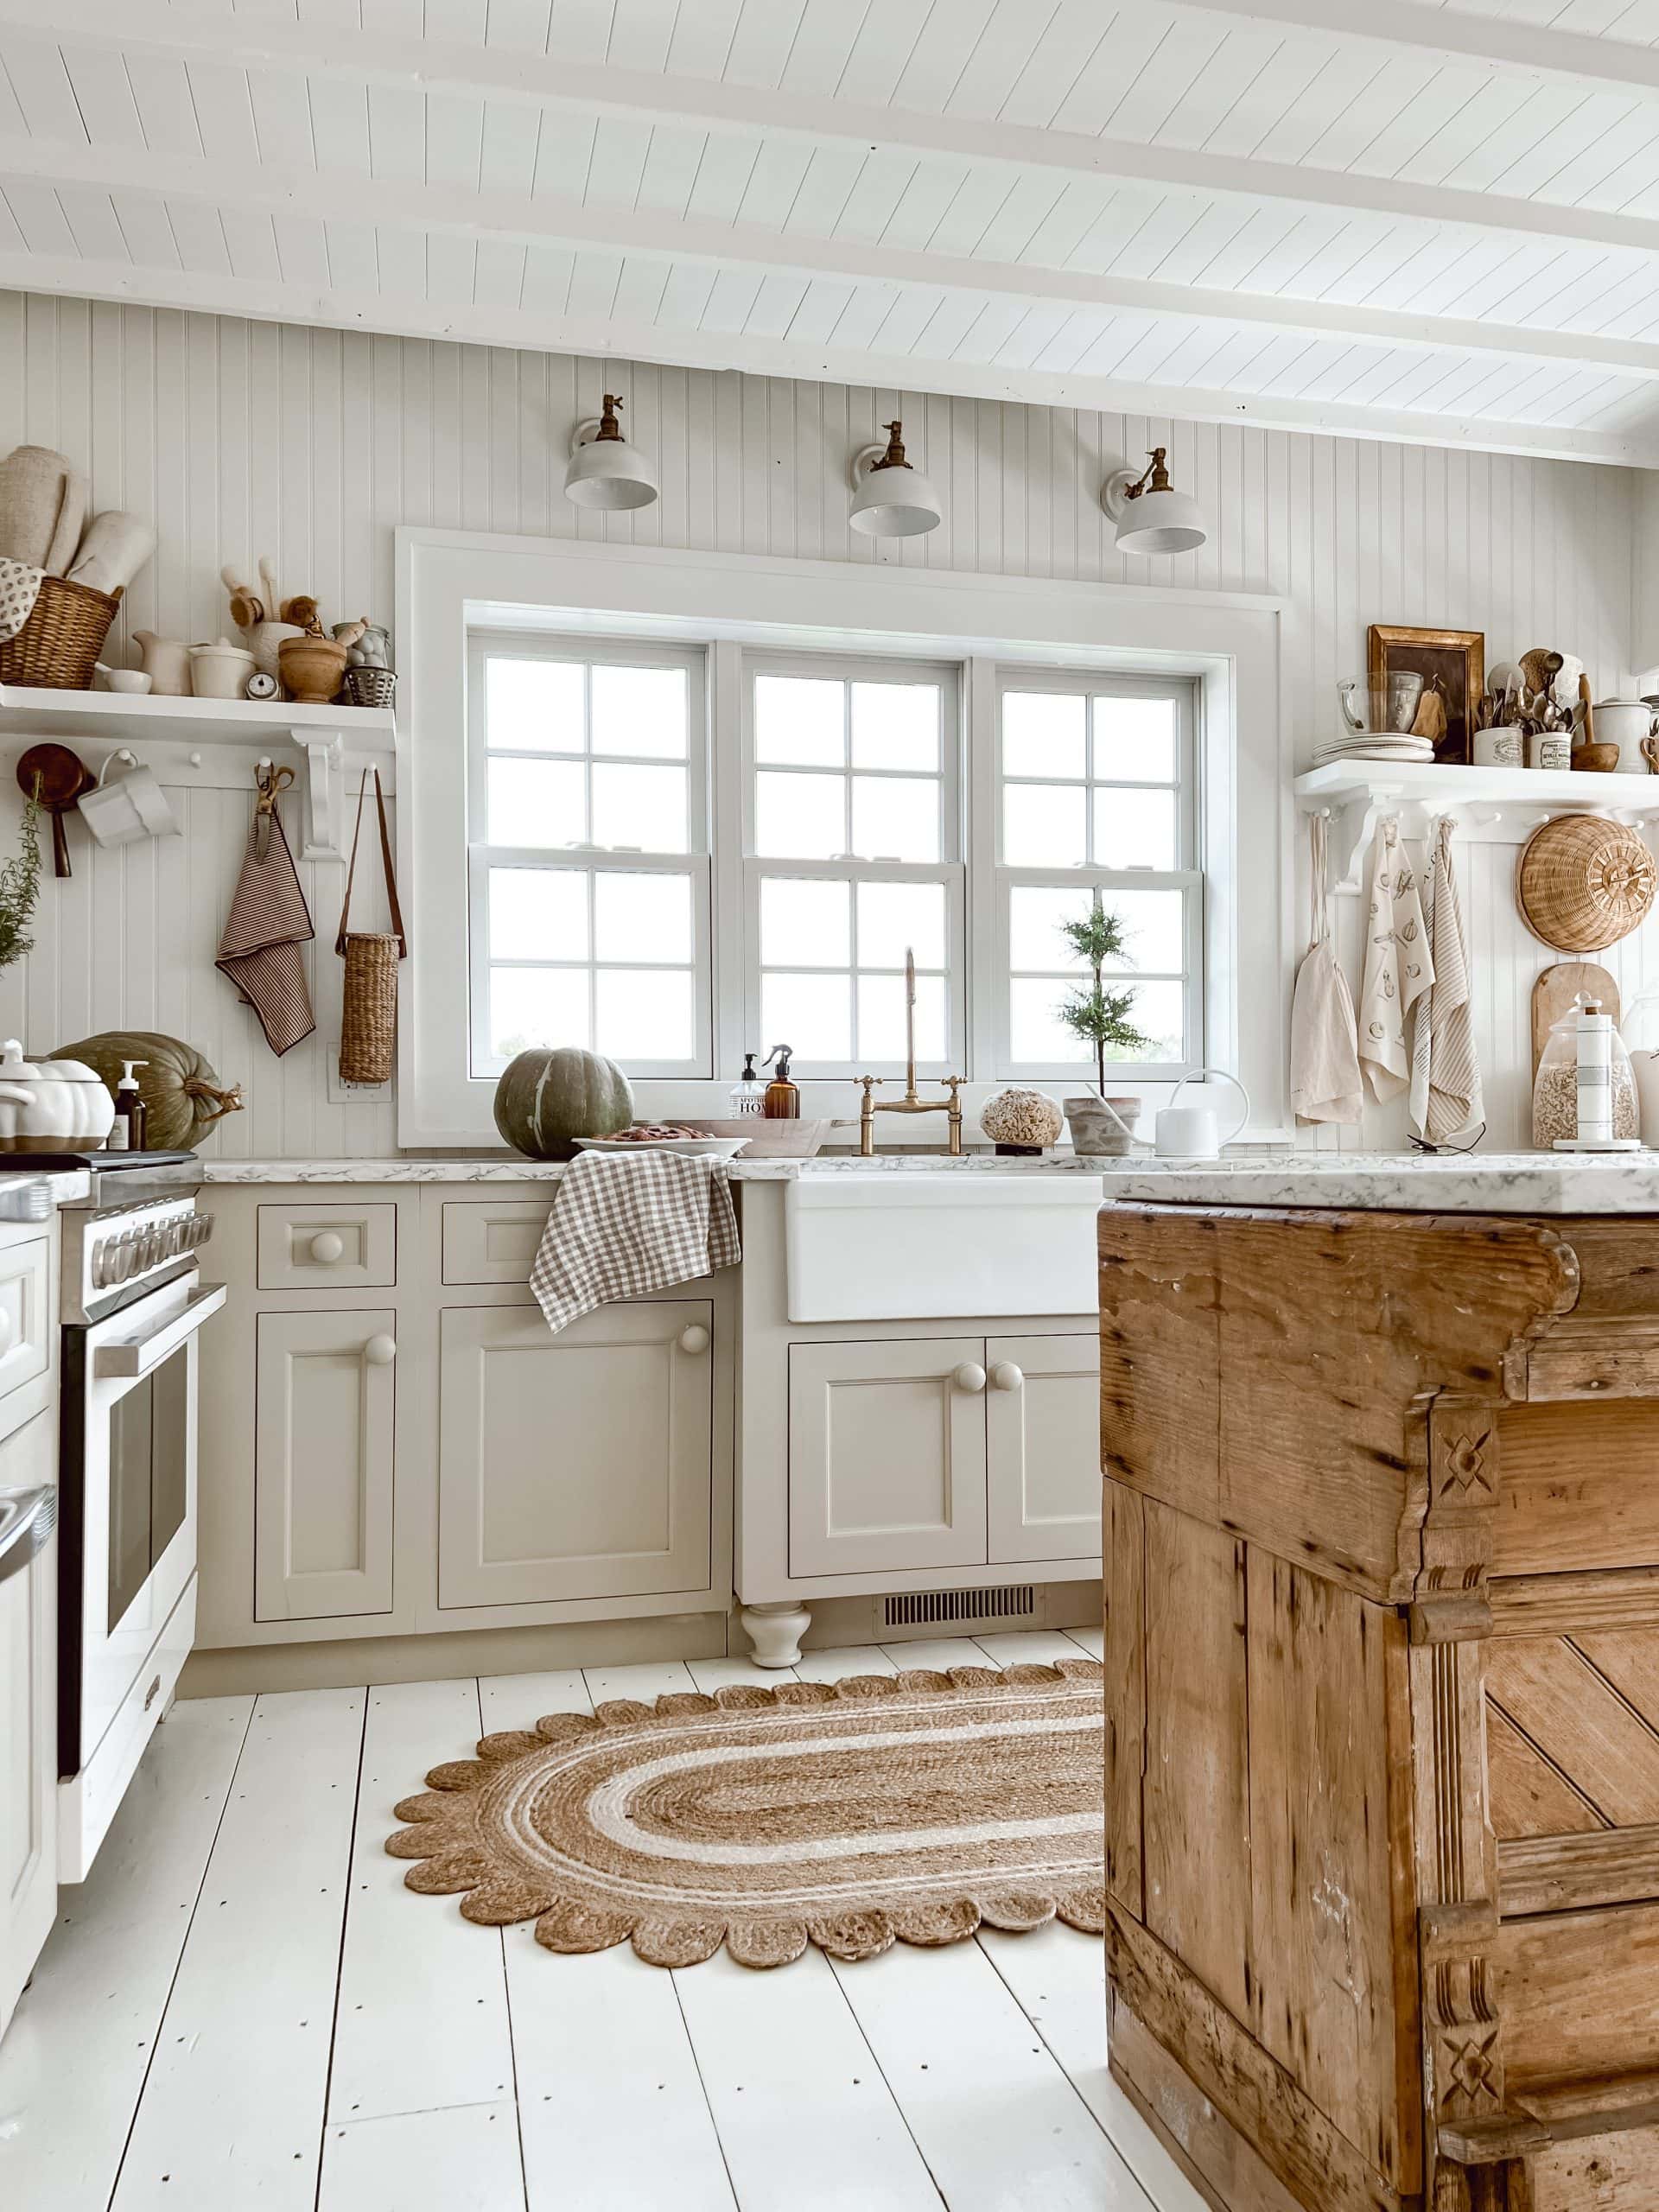 rustic kitchen island paired with soft gray cabinets and marble countertops.